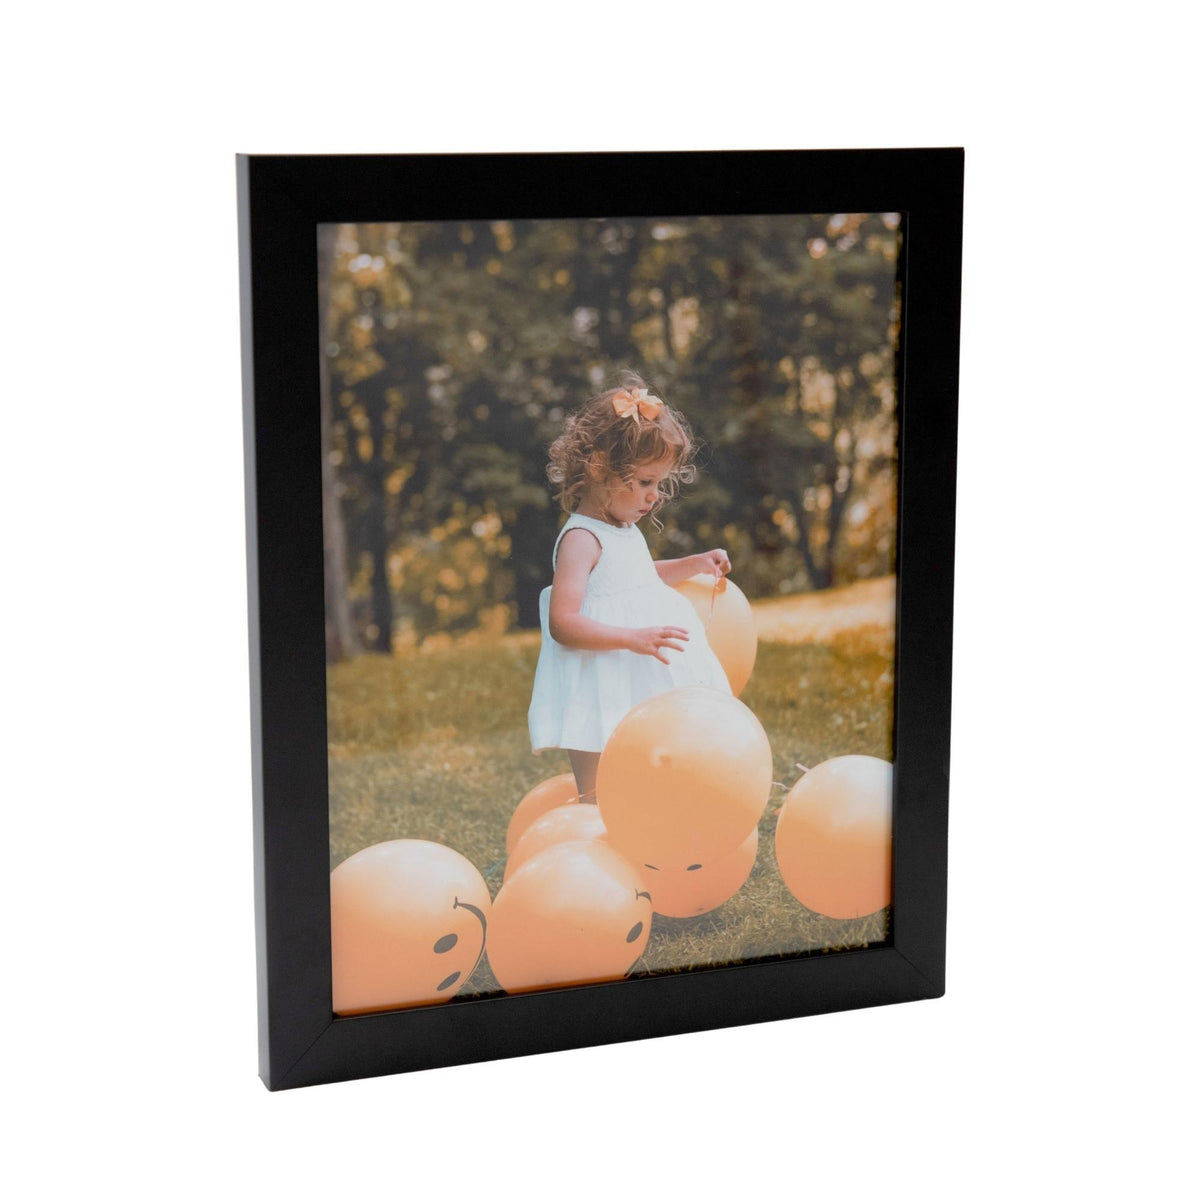 Dark Wood Canvas Picture Frame Two Tone Large 19x22 for 12x16 Picture